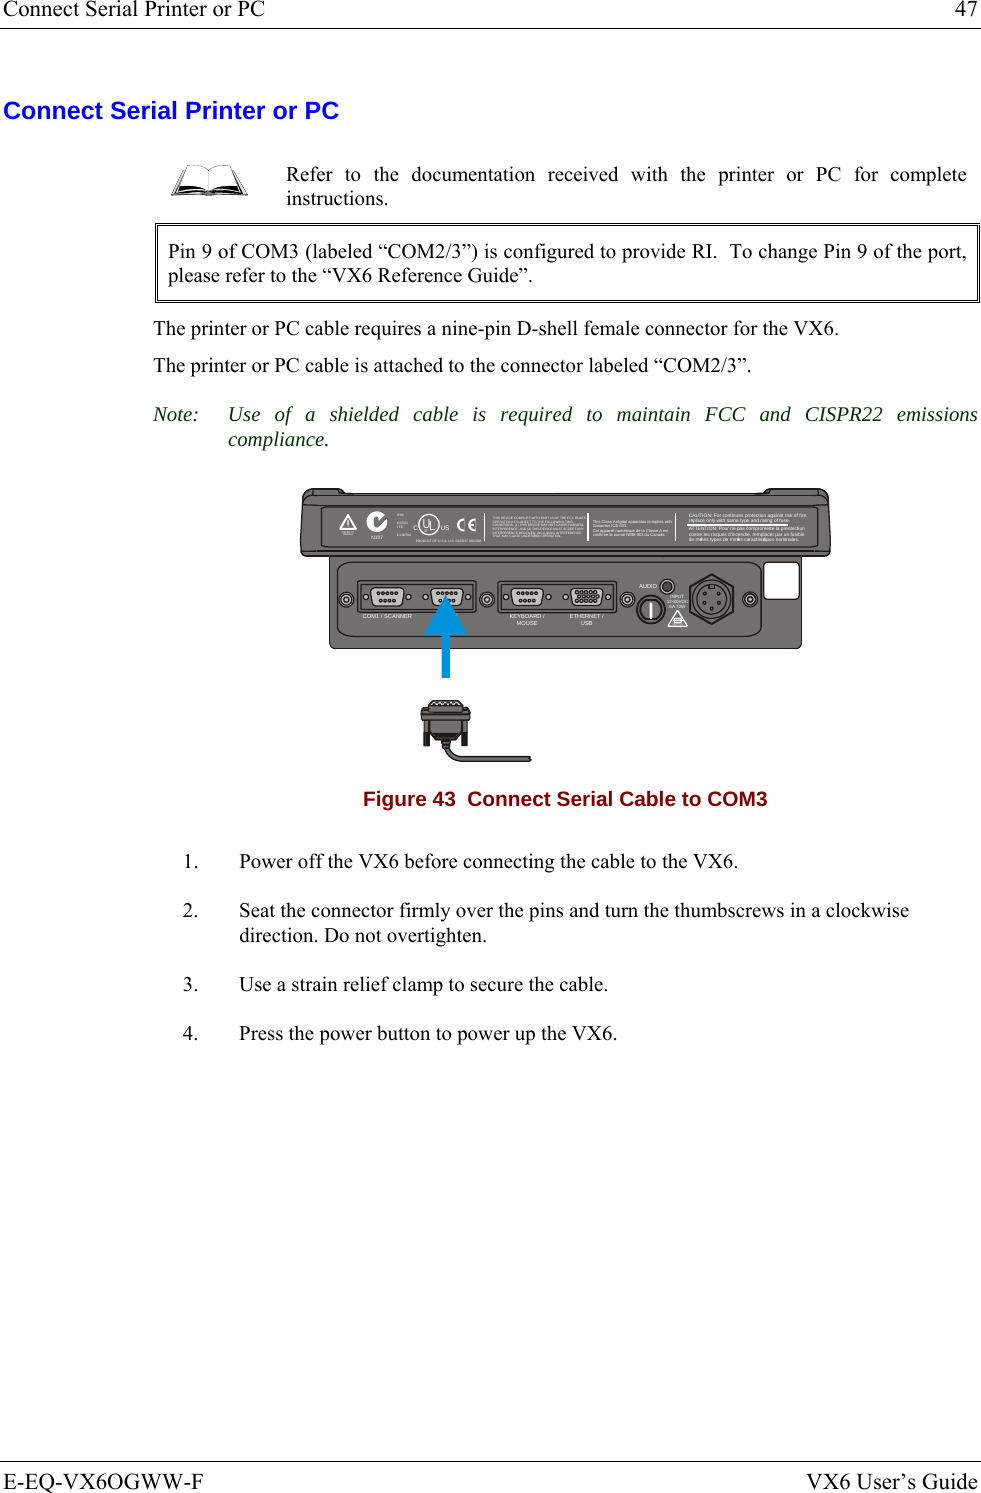 Connect Serial Printer or PC  47 E-EQ-VX6OGWW-F  VX6 User’s Guide Connect Serial Printer or PC  Refer to the documentation received with the printer or PC for complete instructions. Pin 9 of COM3 (labeled “COM2/3”) is configured to provide RI.  To change Pin 9 of the port, please refer to the “VX6 Reference Guide”. The printer or PC cable requires a nine-pin D-shell female connector for the VX6.  The printer or PC cable is attached to the connector labeled “COM2/3”. Note:  Use of a shielded cable is required to maintain FCC and CISPR22 emissions compliance. T10A, 125VINPUT:12-80VDC6A 72WAUDIOETHERNET /USBKEYBOARD /MOUSECOM2/3COM1 / SCANNERN107REFER TOMANUALIP66LISTEDI.T.E.E-130794CPRODUCT OF U.S.A. U.S. PATENT 5862393USUL®THIS DEVICE COMPLIES WITH PART 15 OF THE FCC RULES.OPERATION IS SUBJECT  TO THE FOLLOWING TWOCONDITIONS: (1) THIS DEVICE MAY NOT CAUSE HARMFULINTERFERENCE , AND (2) THIS  DEVICE MUST ACCE PT ANYINTERFERENCE RECEIVED, INCLUDING INTERFERENCETHAT MAY CAUSE UNDESIRED OPERATION.This Class A digital apparatus complies withCanadian ICE-003.Cet appareil num de la Classe A estconfirme l ériqueorme NMB-003 du Canadaà nCAUTION: For continues protection against risk of fire, replace only with same type and rating of fuse.ATTENTION: Pour ne pas compromette la preotectioncontre les risques d&apos;incendie, remplacer par un fusiblede mmes types de mmes caractristques nominales.êêé Figure 43  Connect Serial Cable to COM3 1.  Power off the VX6 before connecting the cable to the VX6. 2.  Seat the connector firmly over the pins and turn the thumbscrews in a clockwise direction. Do not overtighten. 3.  Use a strain relief clamp to secure the cable. 4.  Press the power button to power up the VX6.  